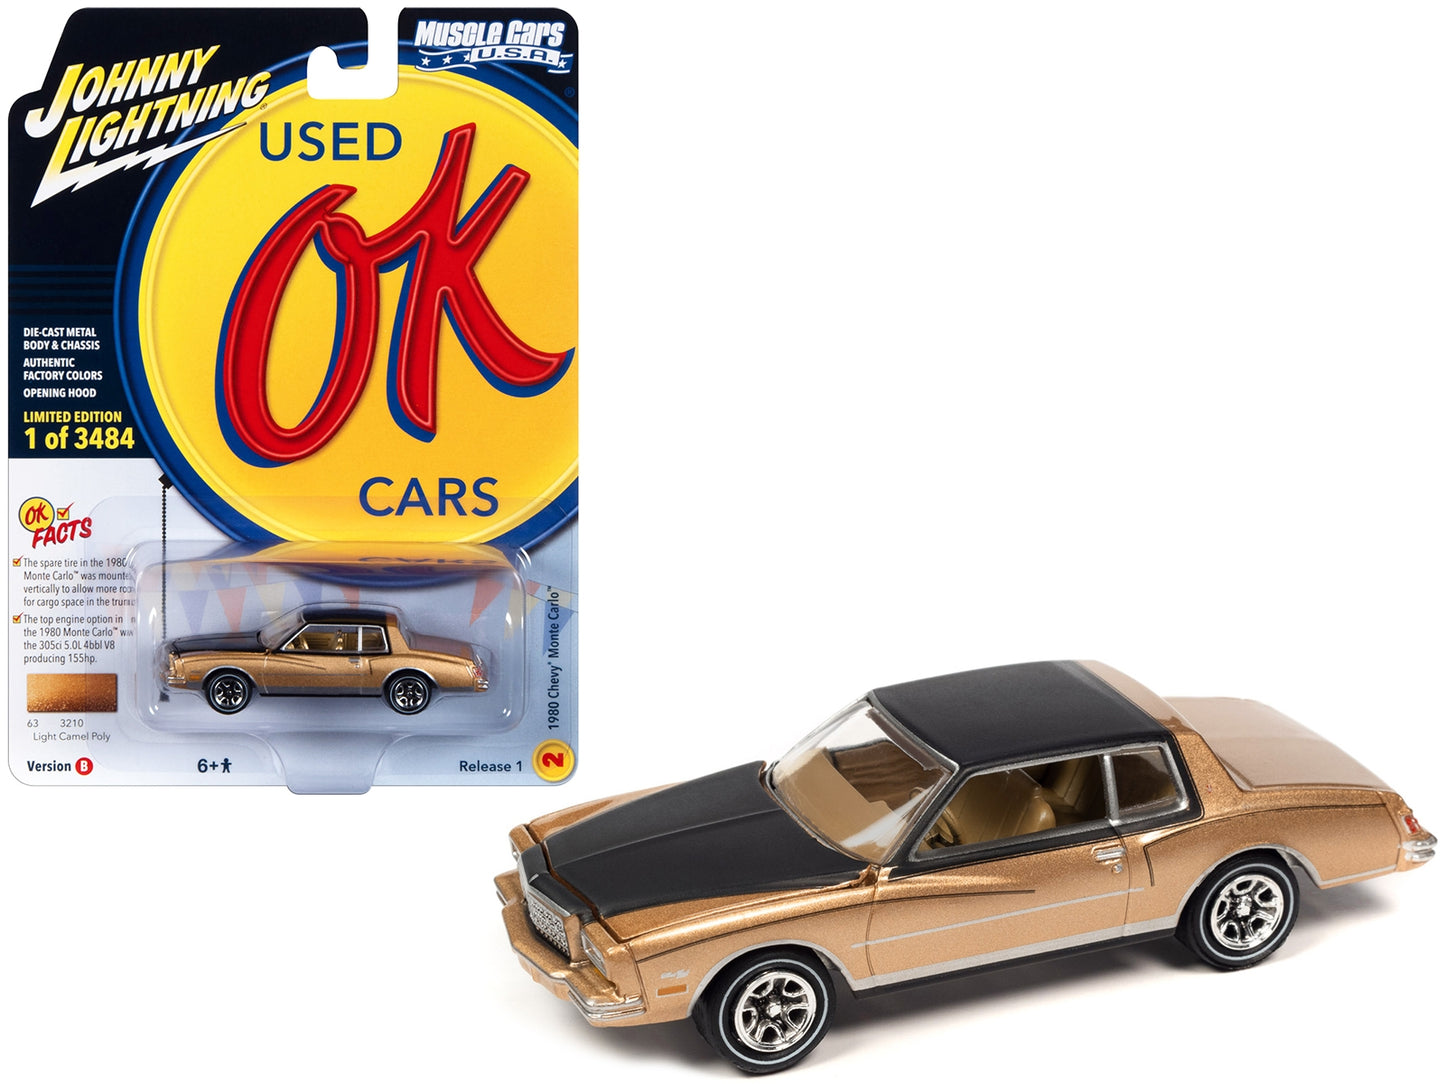 1980 Chevrolet Monte Carlo Light Camel Gold Metallic with Black Top and Hood Limited Edition to 3484 pieces Worldwide "OK Used Cars" 2023 Series 1/64 Diecast Model Car by Johnny Lightning